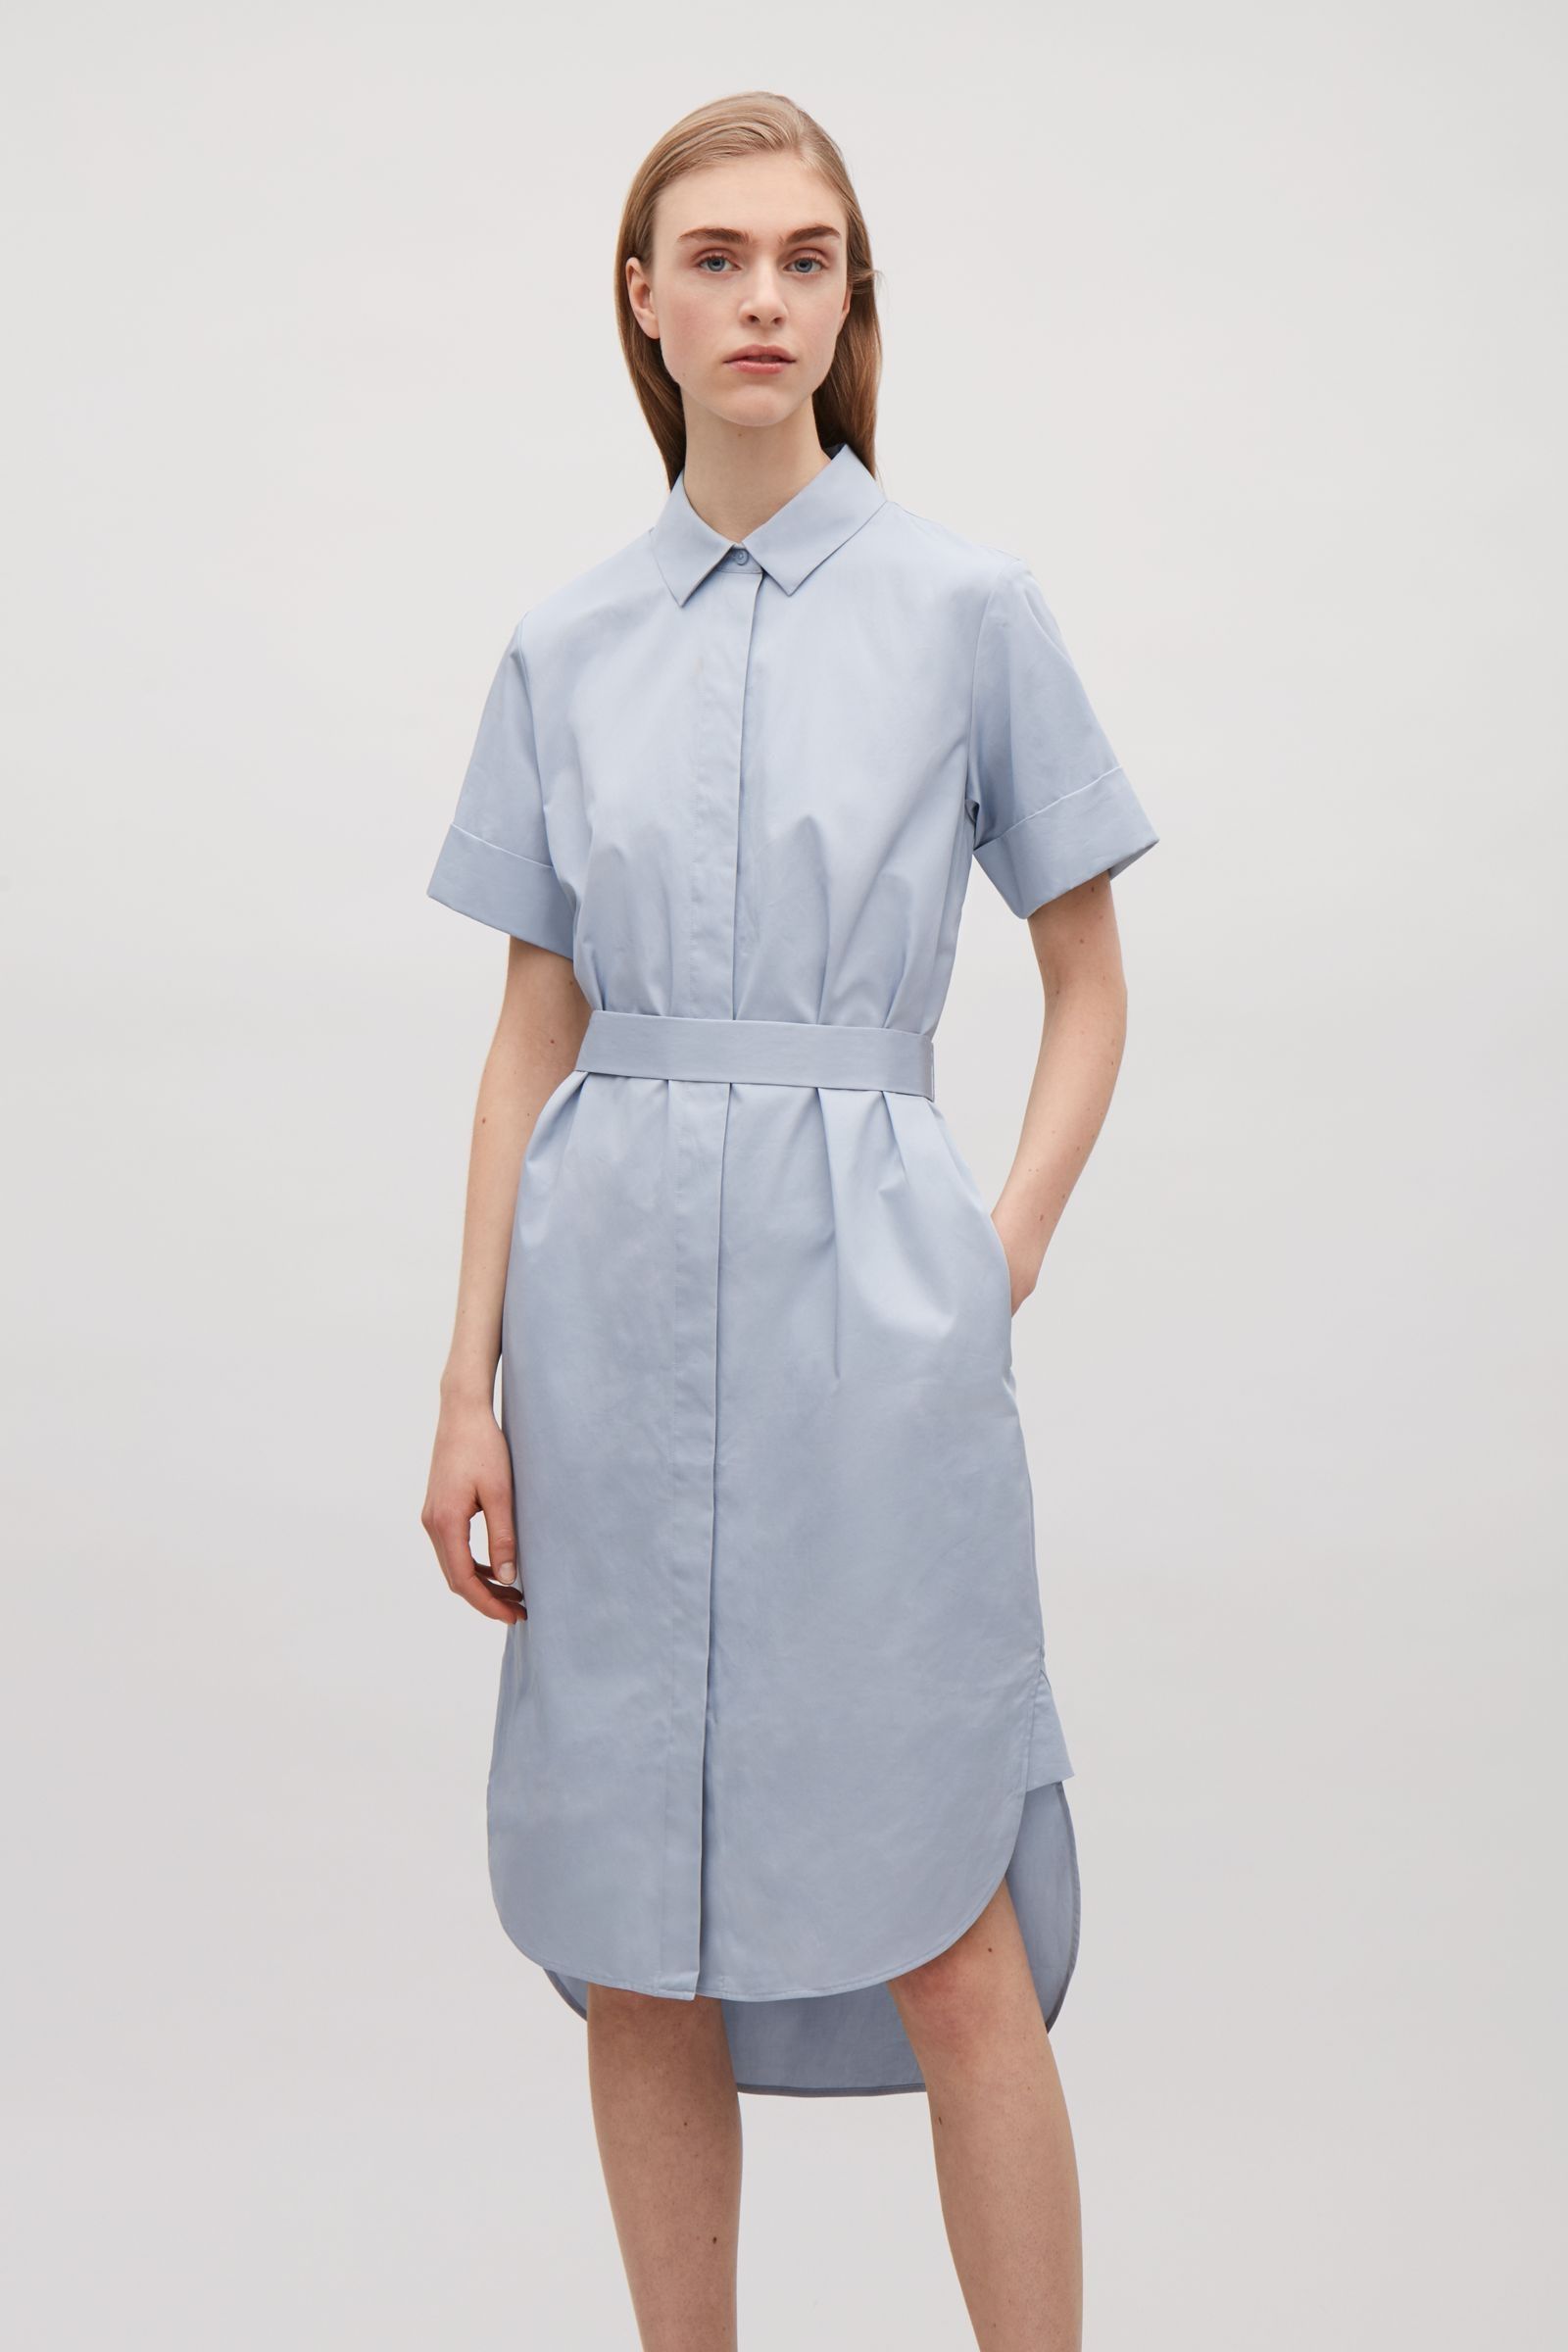 Cos image 4 of belted shirt dress in dusty blue shirt